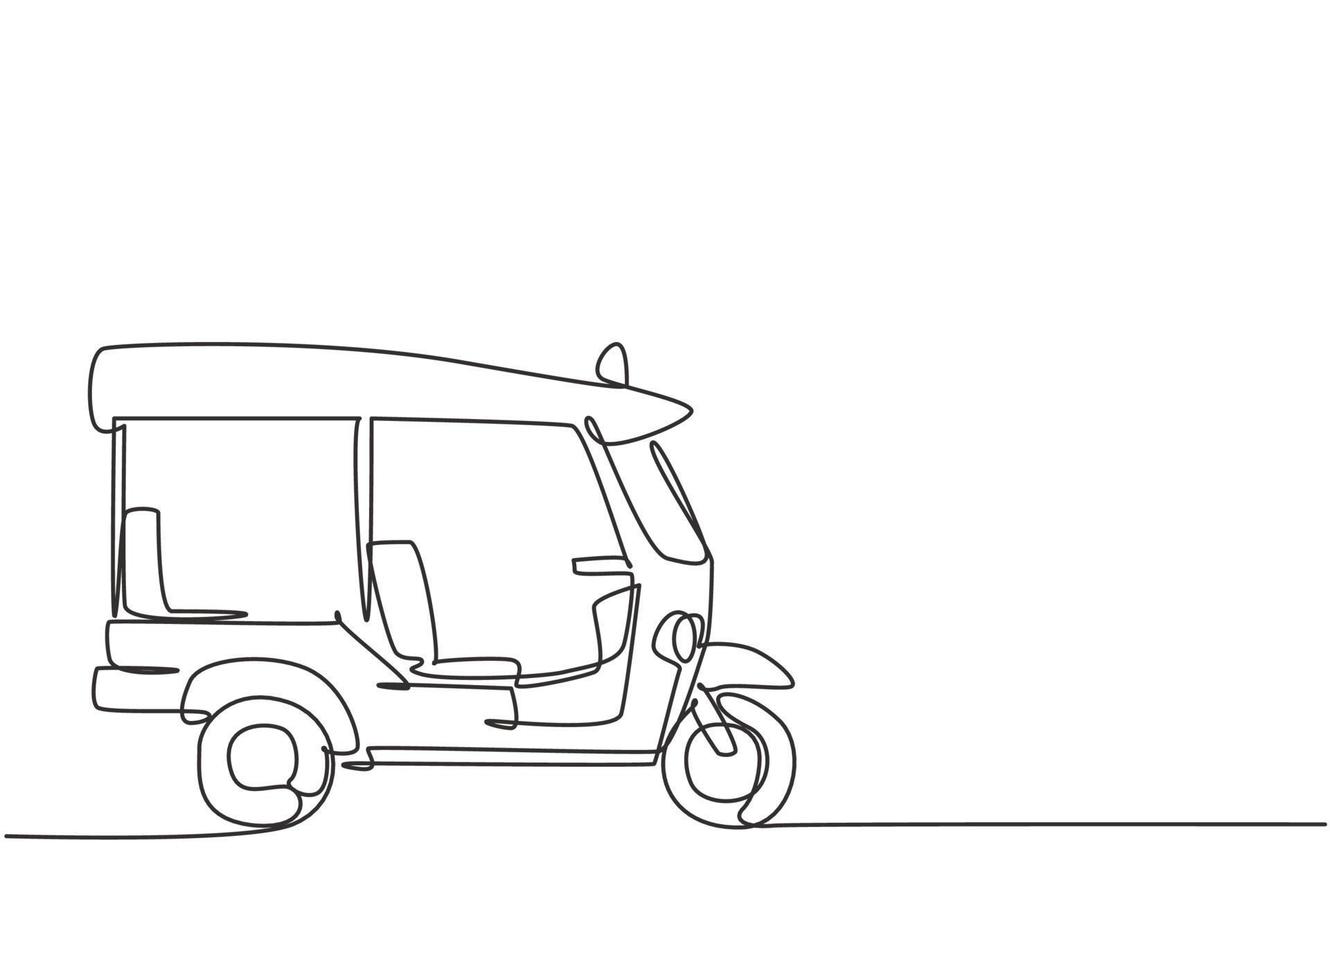 single-one-line-drawing-of-thai-tuk-tuk-seen-from-the-side-serving